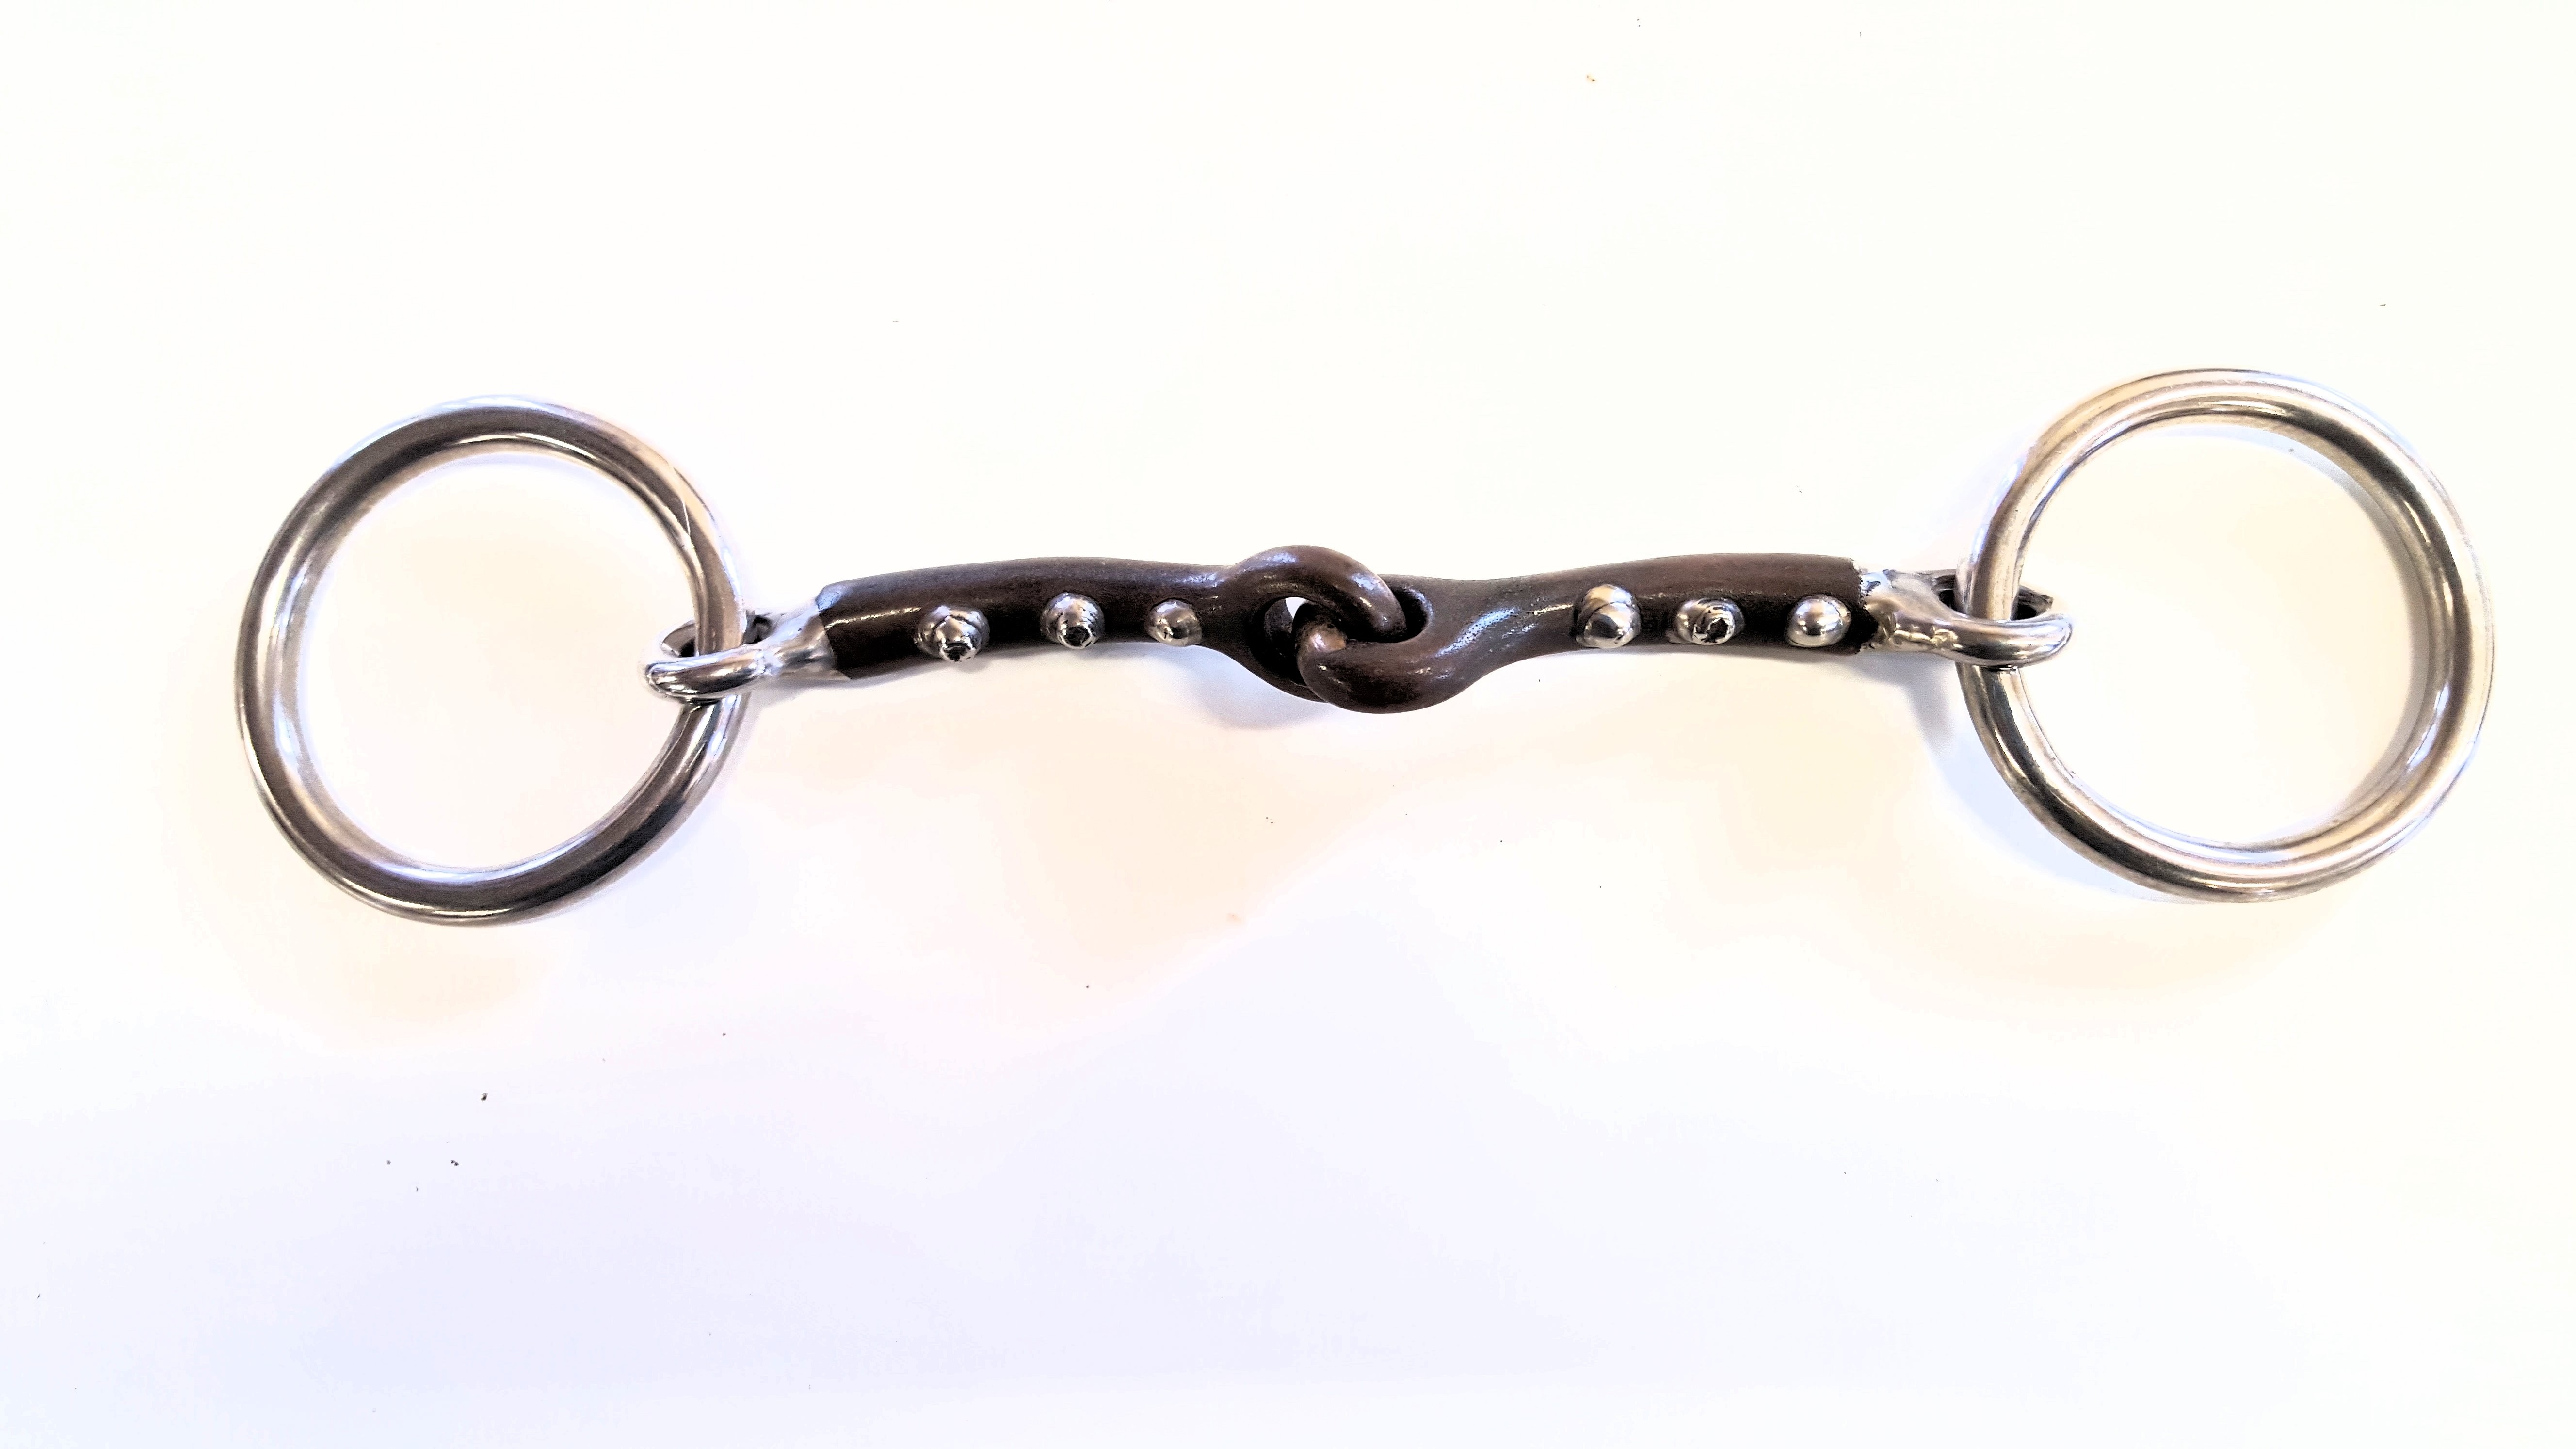 3/8" Washboard snaffle with 2" rings